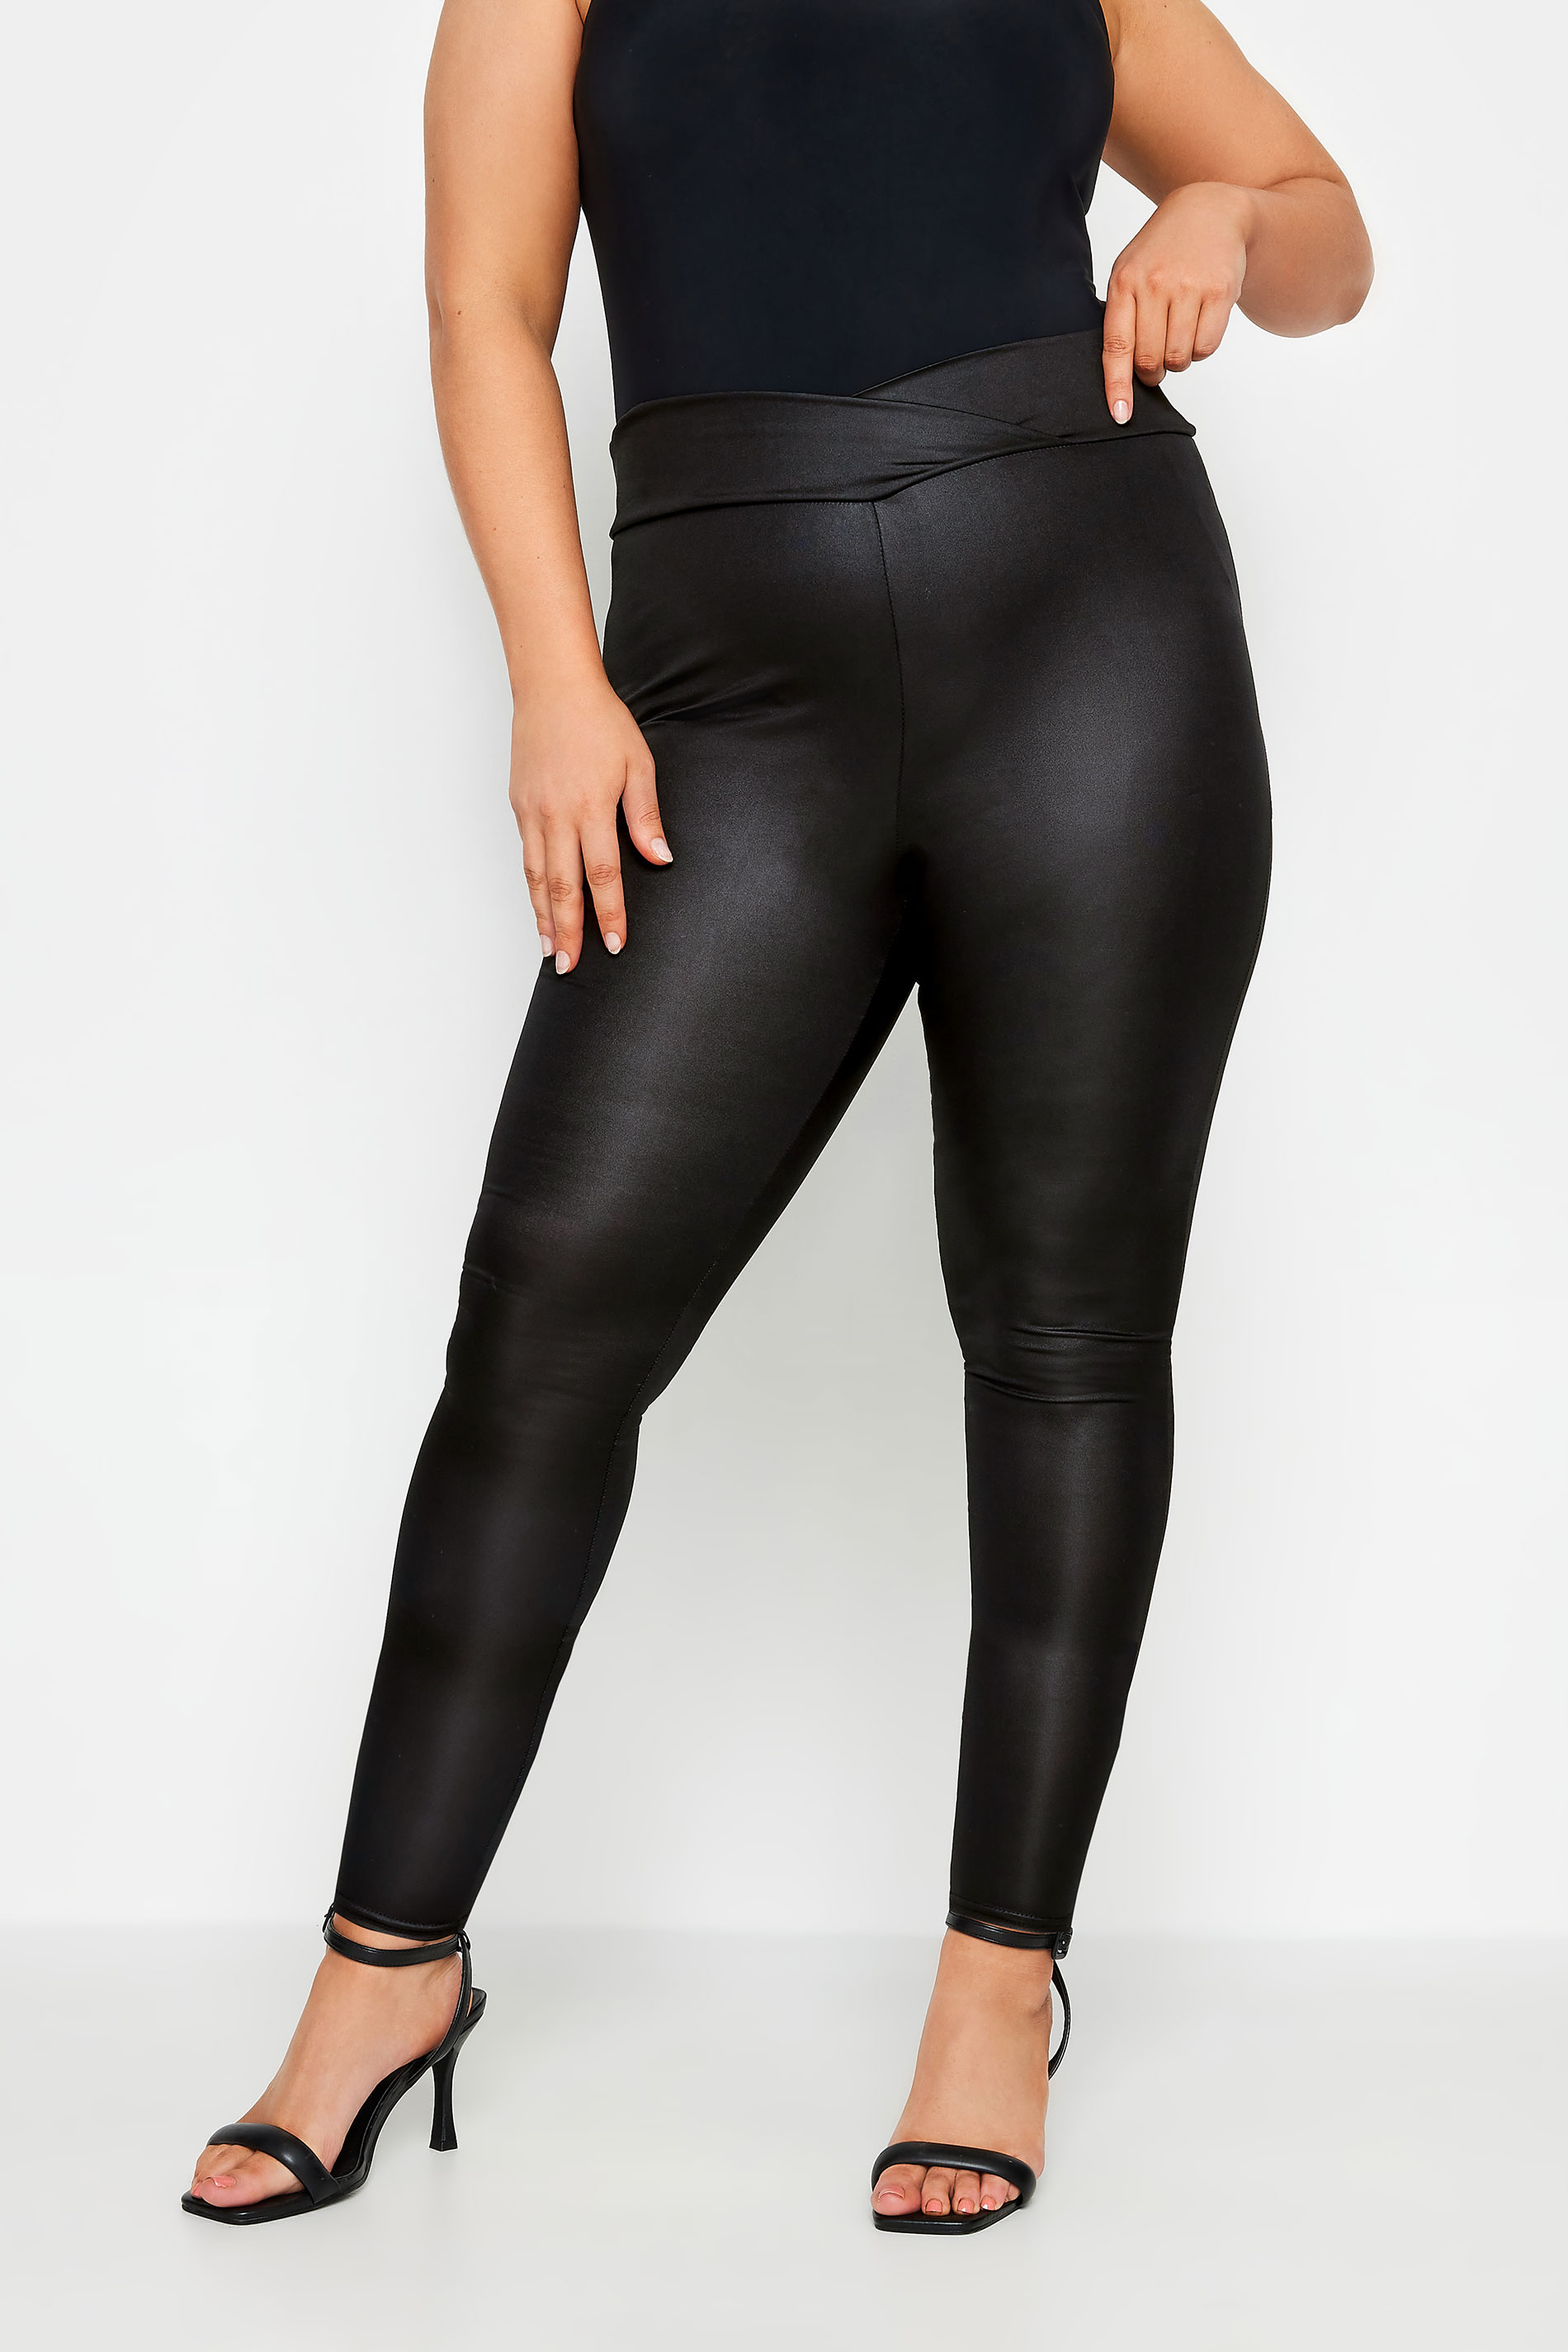 LIMITED COLLECTION Plus Size Black Faux Leather Wrap Waist Leggings | Yours Clothing 2